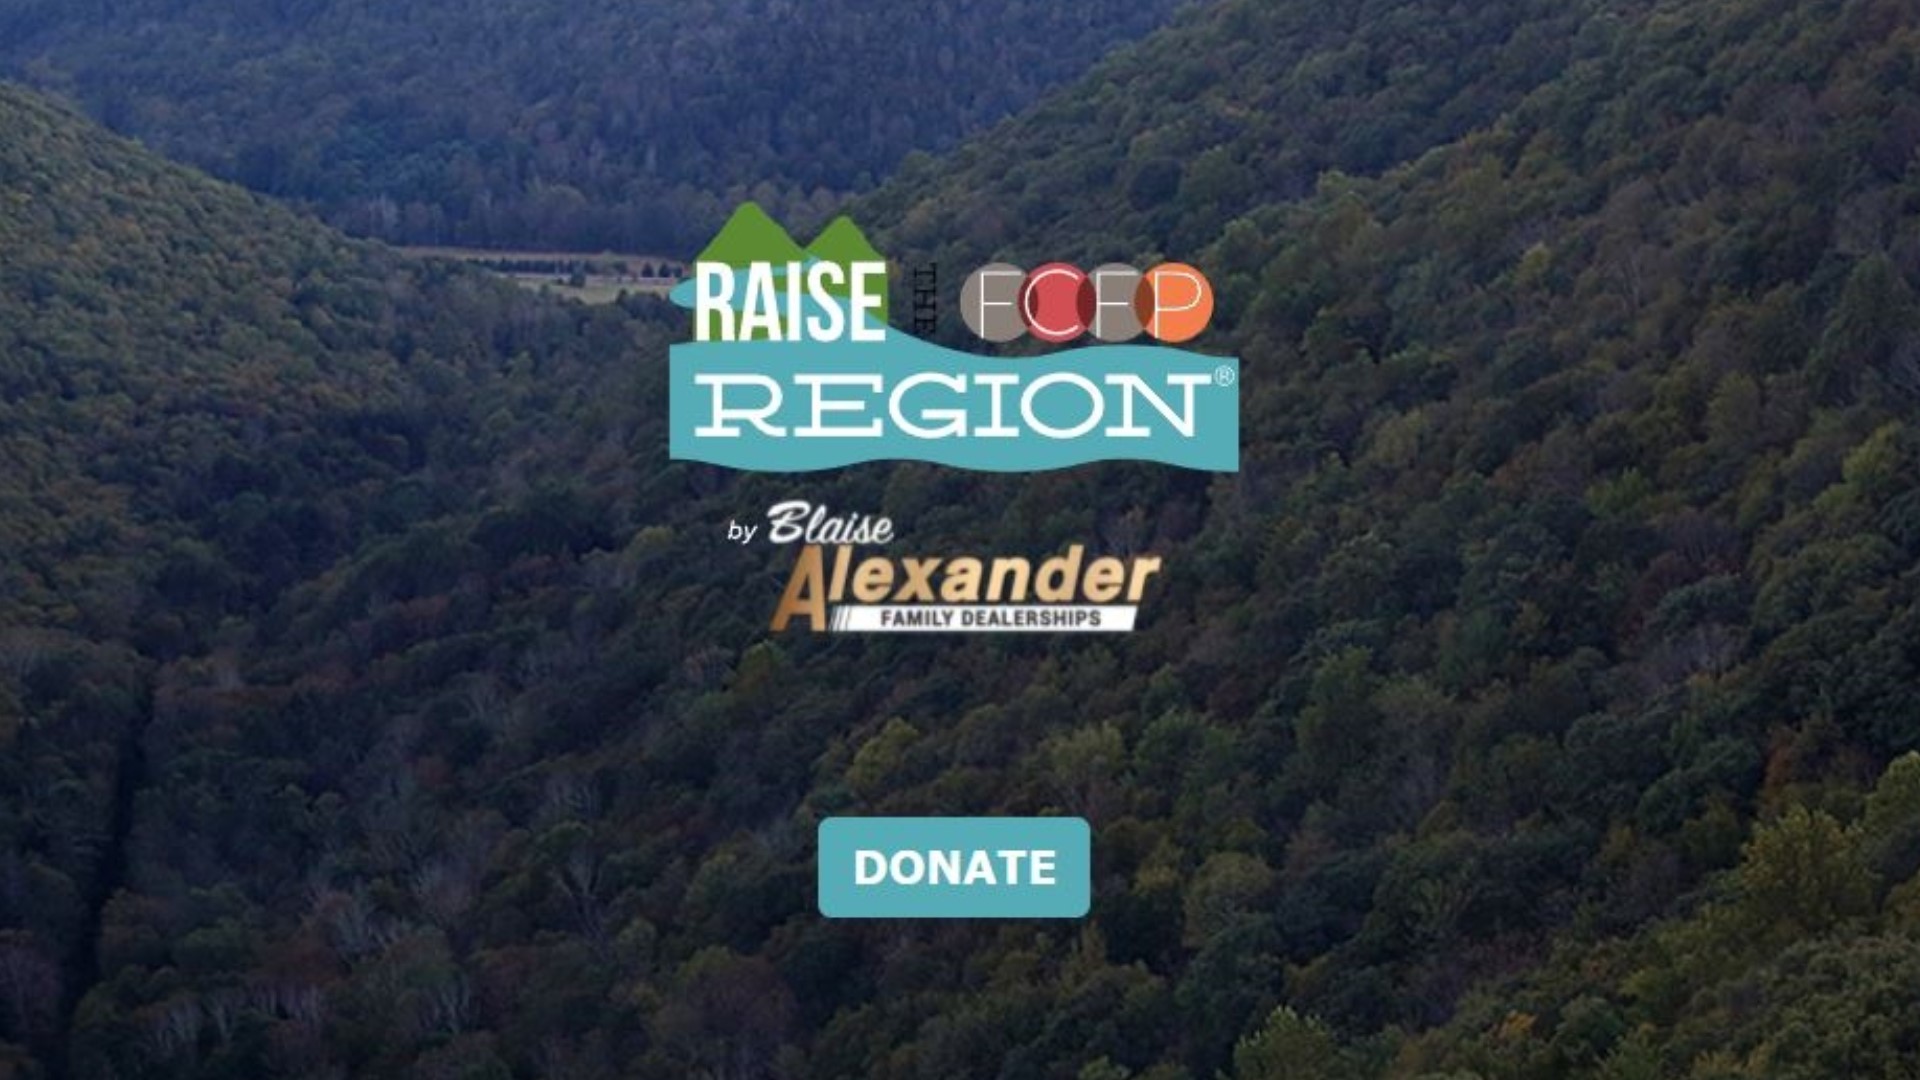 The two-day online fundraiser collects donations for nonprofits in central Pennsylvania.